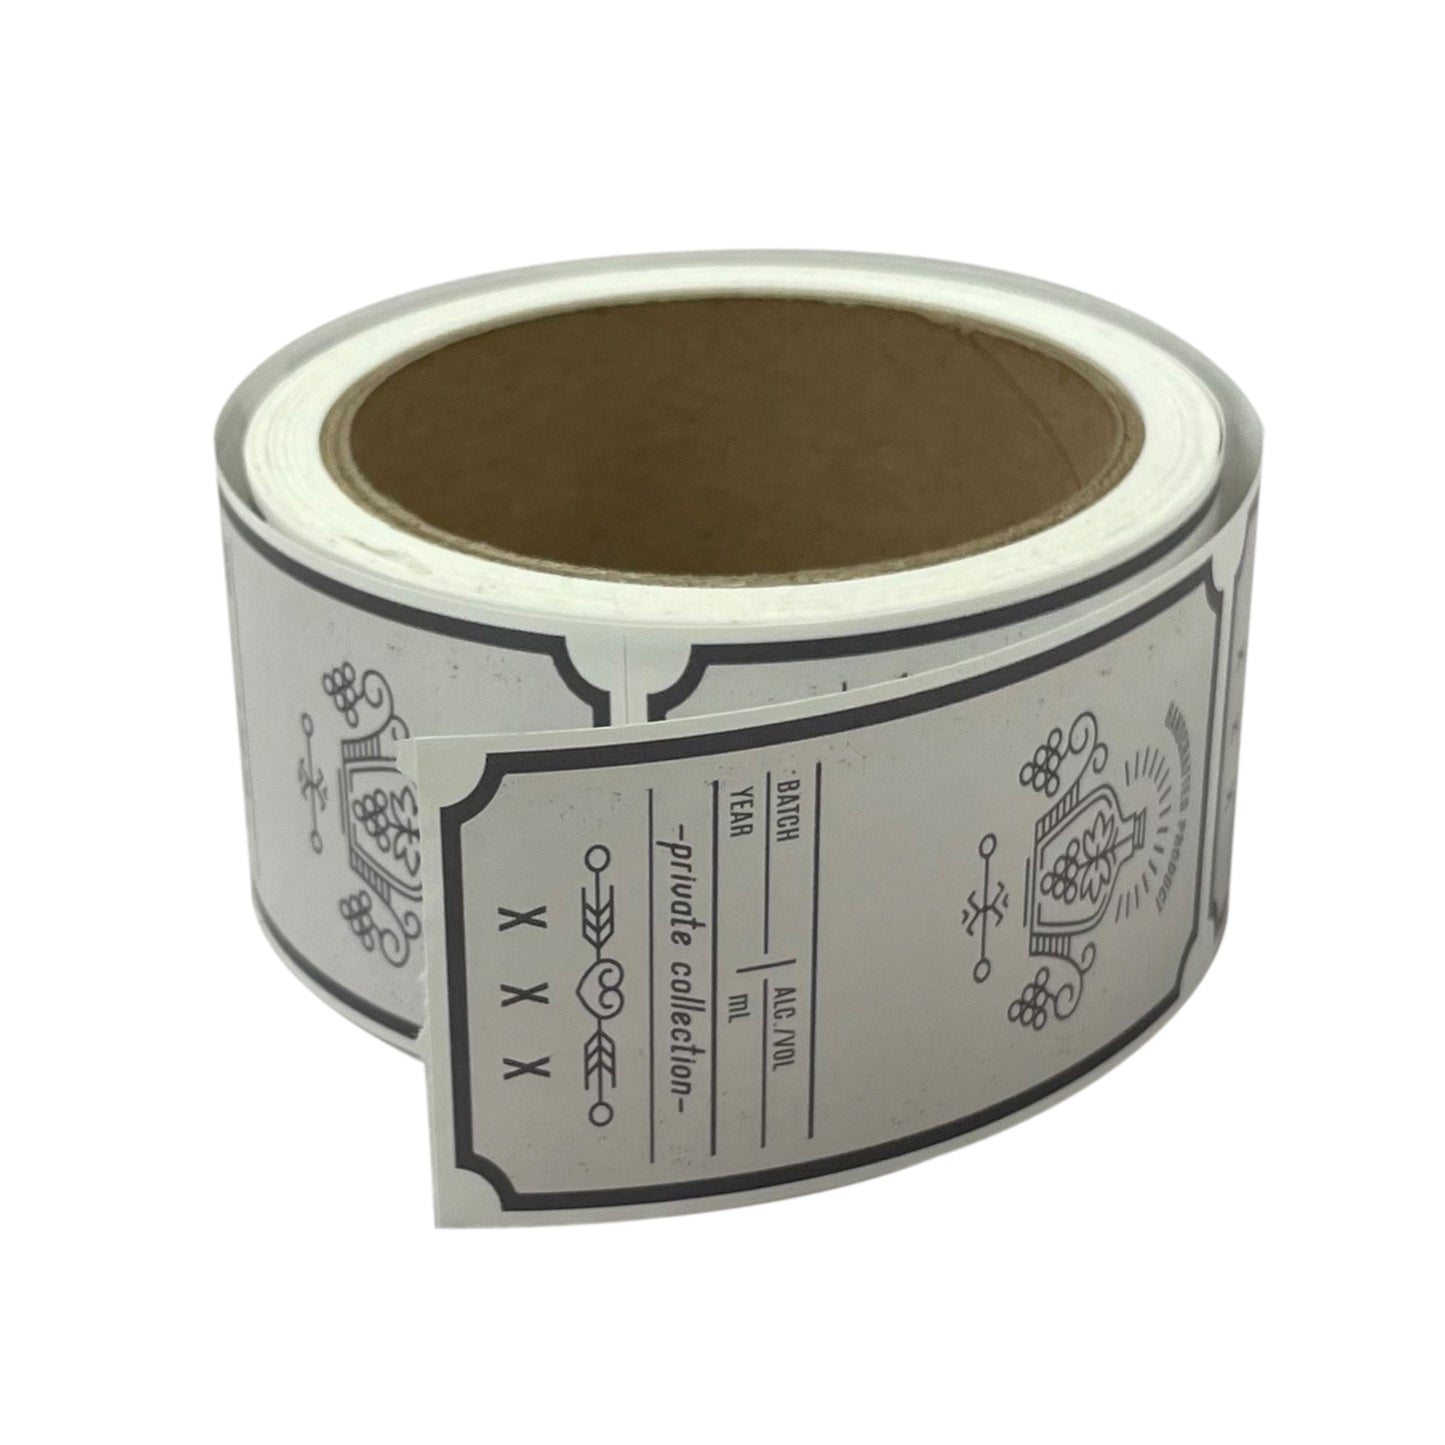 4" x 1.75" White Matte Paper - 2 Color Tamper Seal, Fits BB-001, BB-002 & BB-003(1 Roll), 100 labels per Roll.